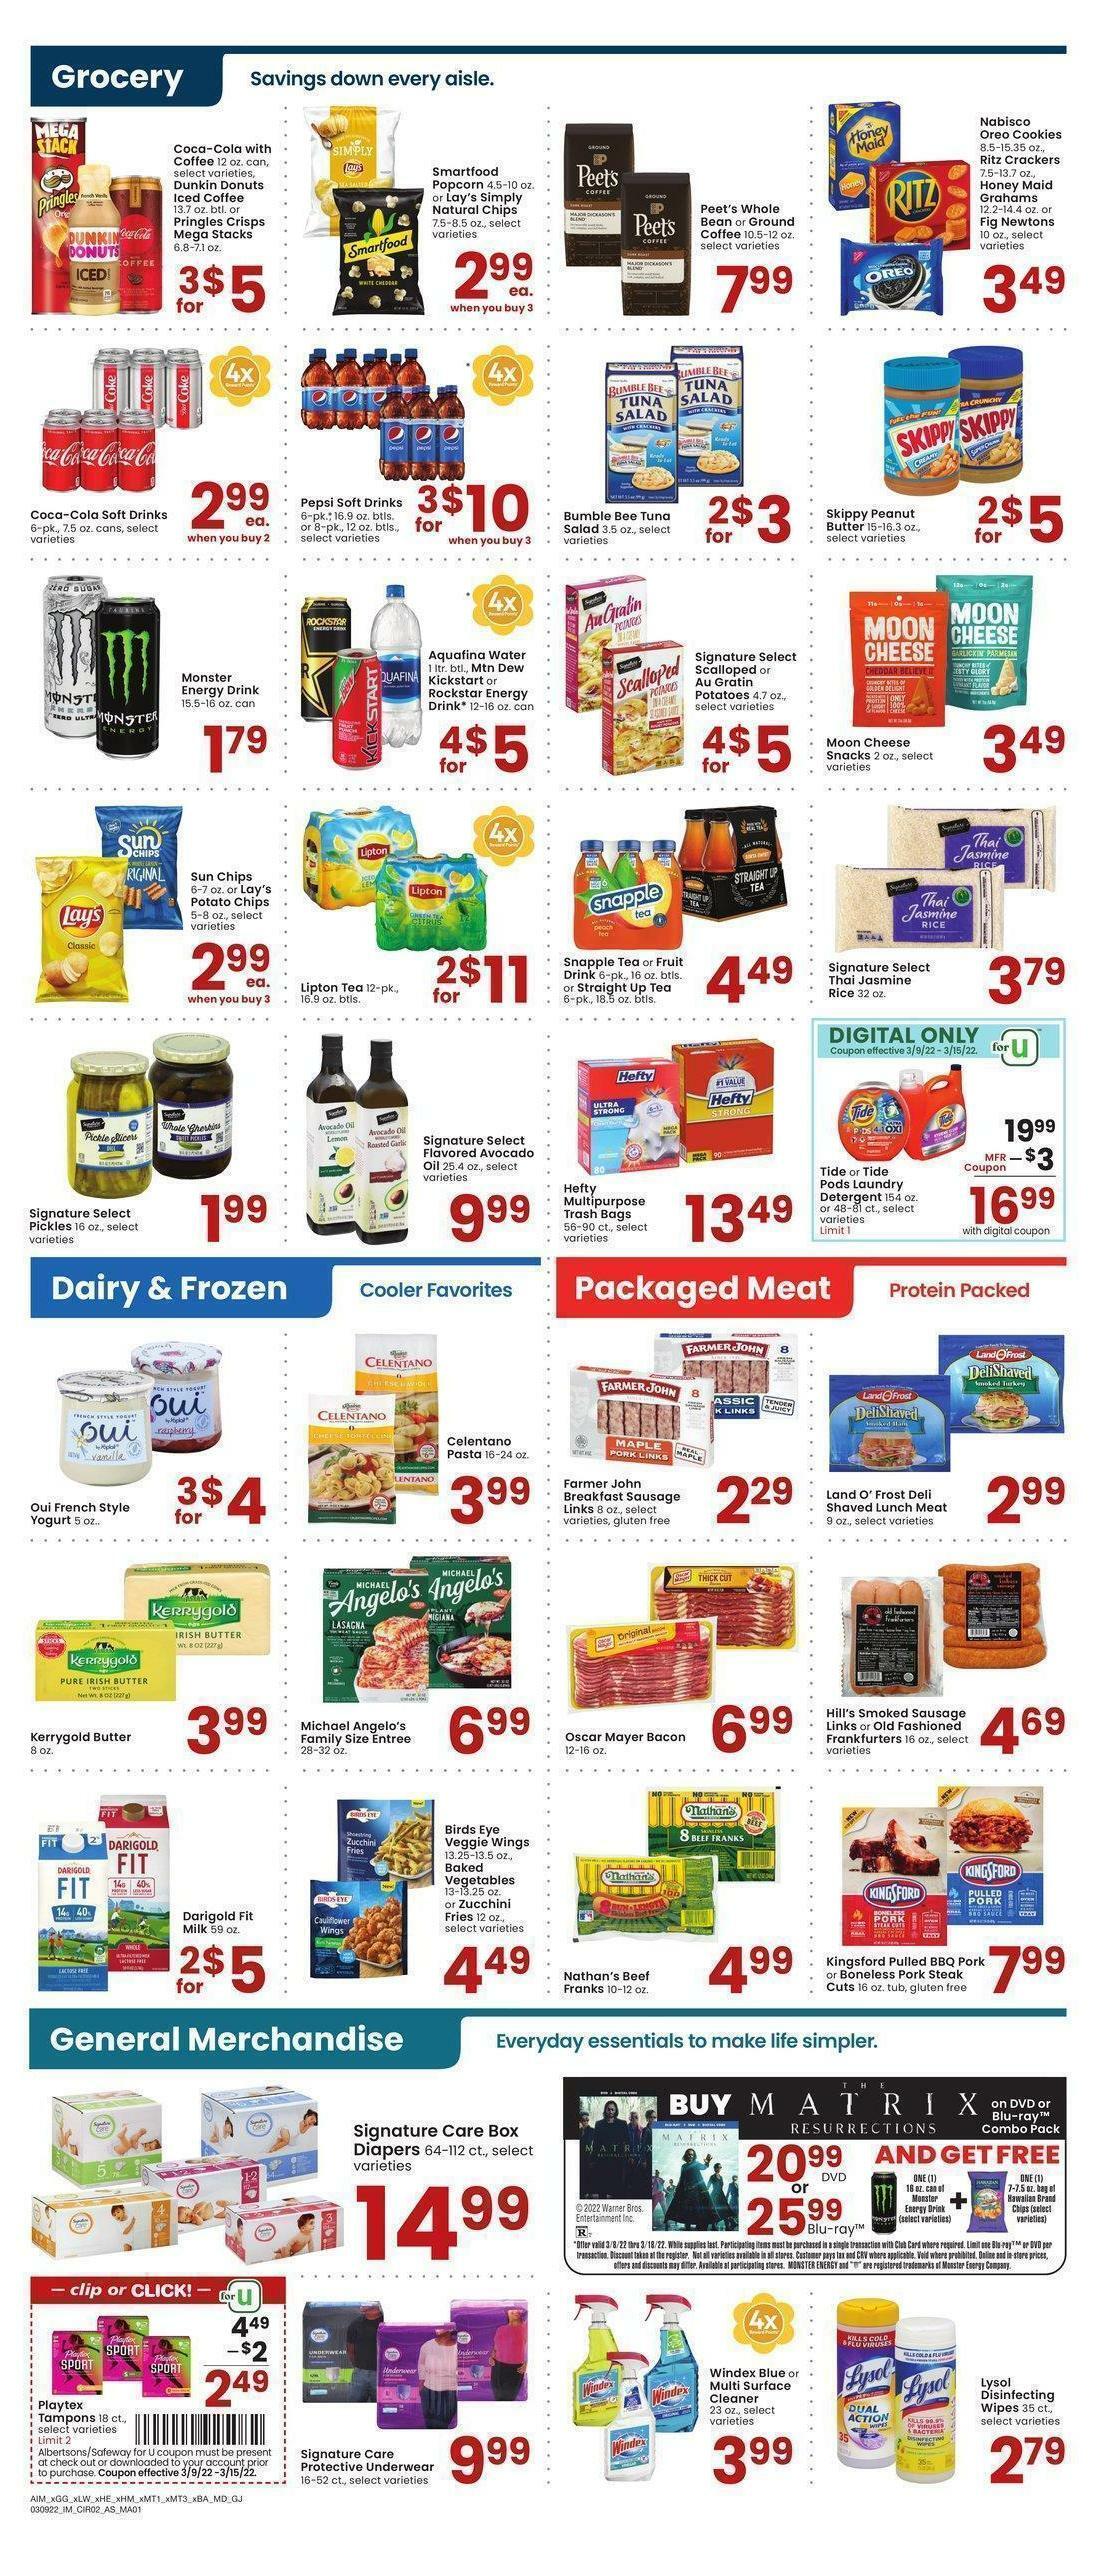 Albertsons Weekly Ad from March 9